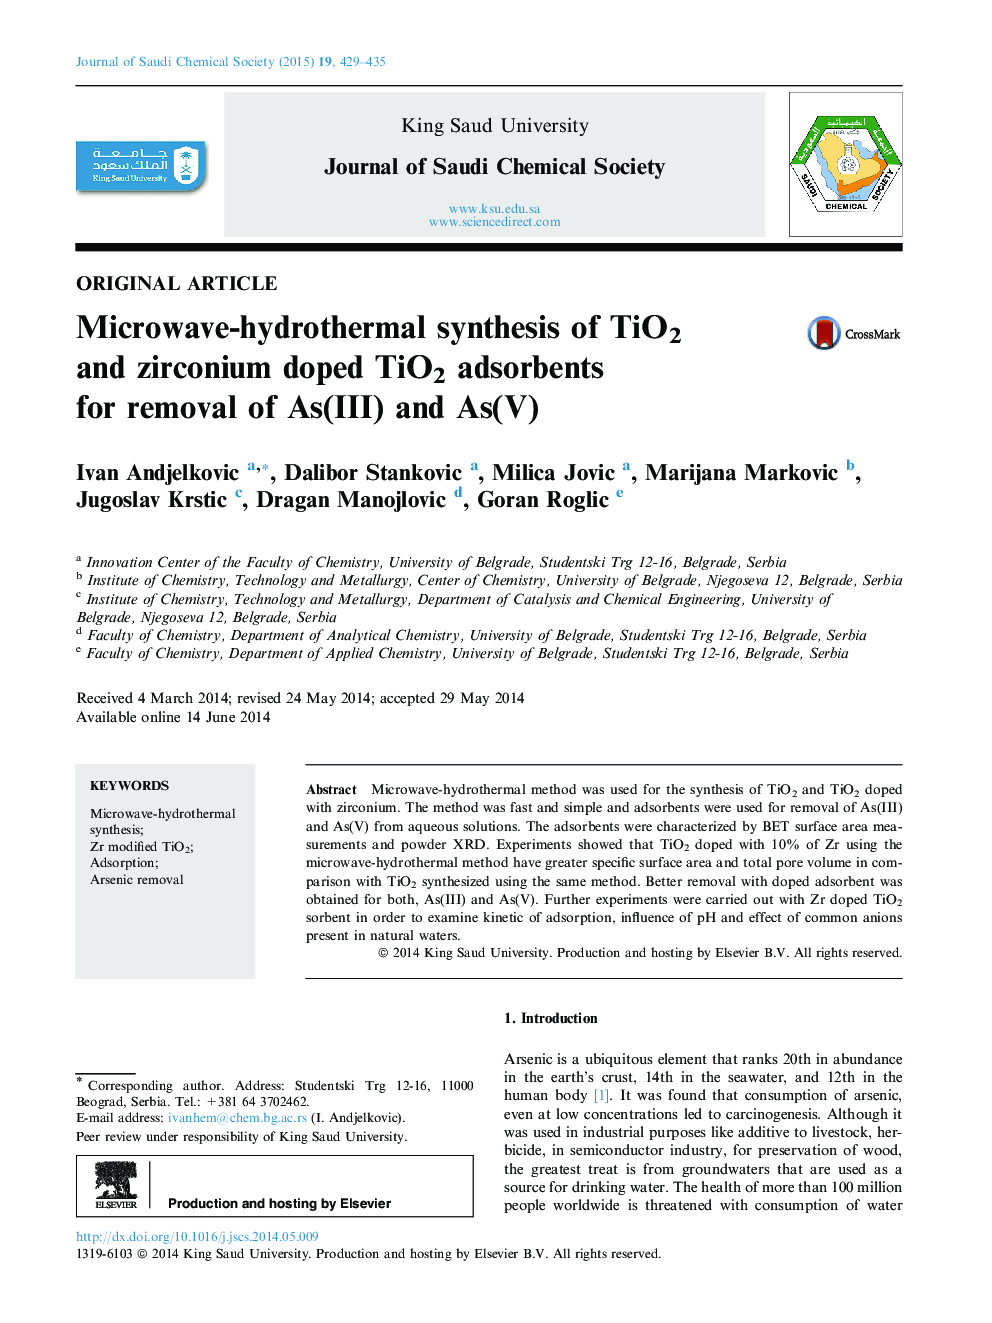 Microwave-hydrothermal synthesis of TiO2 and zirconium doped TiO2 adsorbents for removal of As(III) and As(V) 